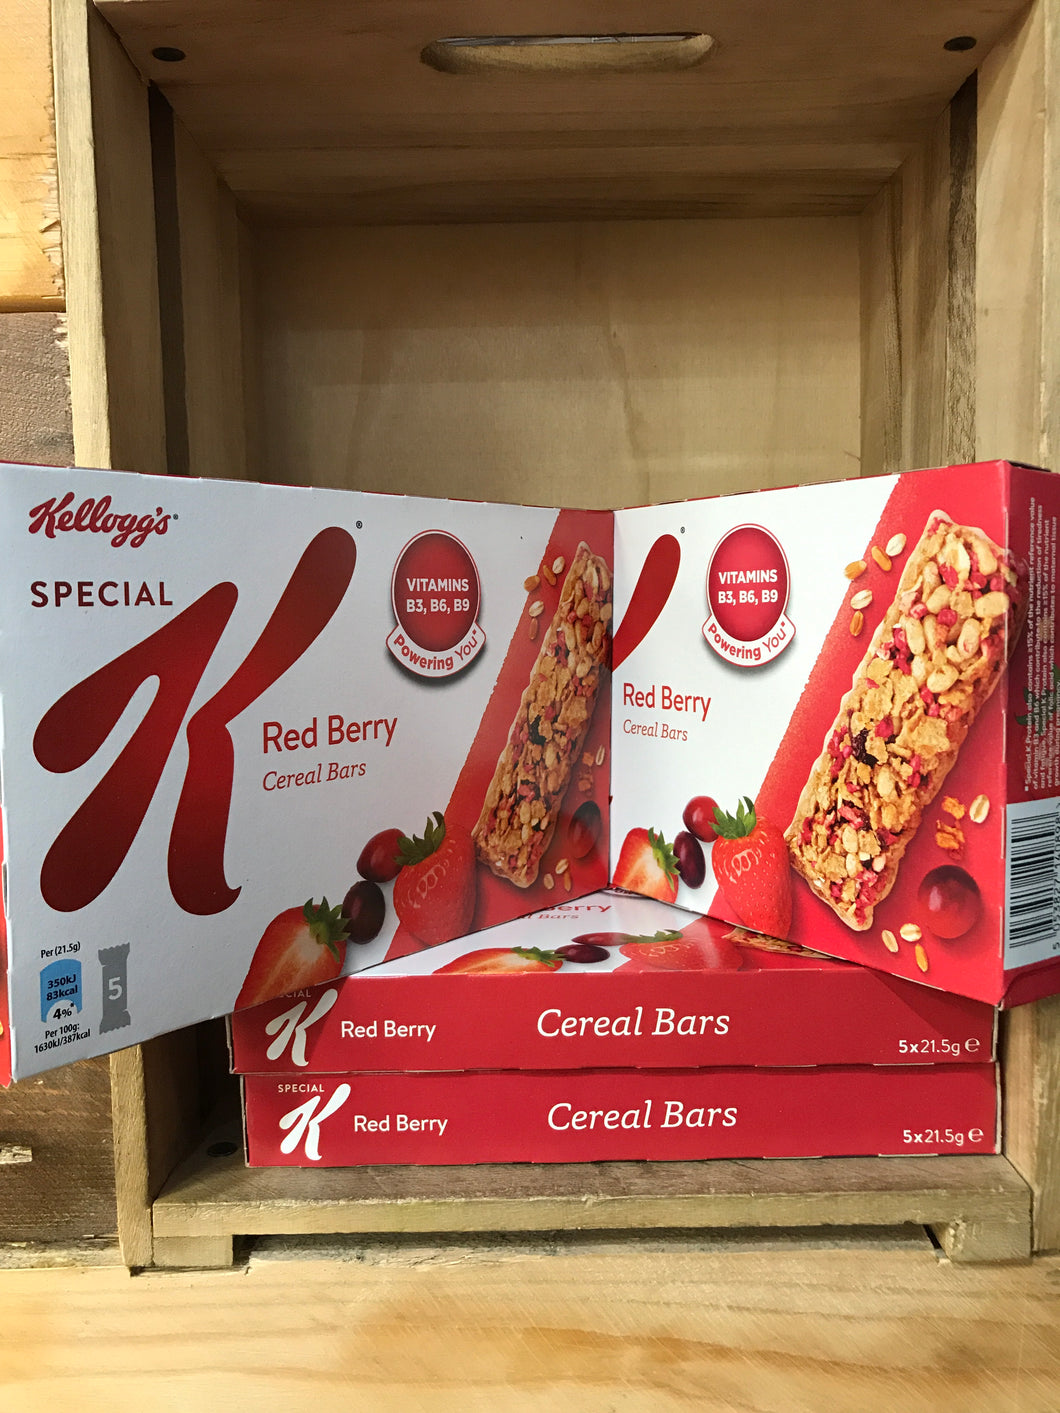 20x Kellogg's Special K Red Berry Cereal Bars 21.5g (4x 5 Bars)